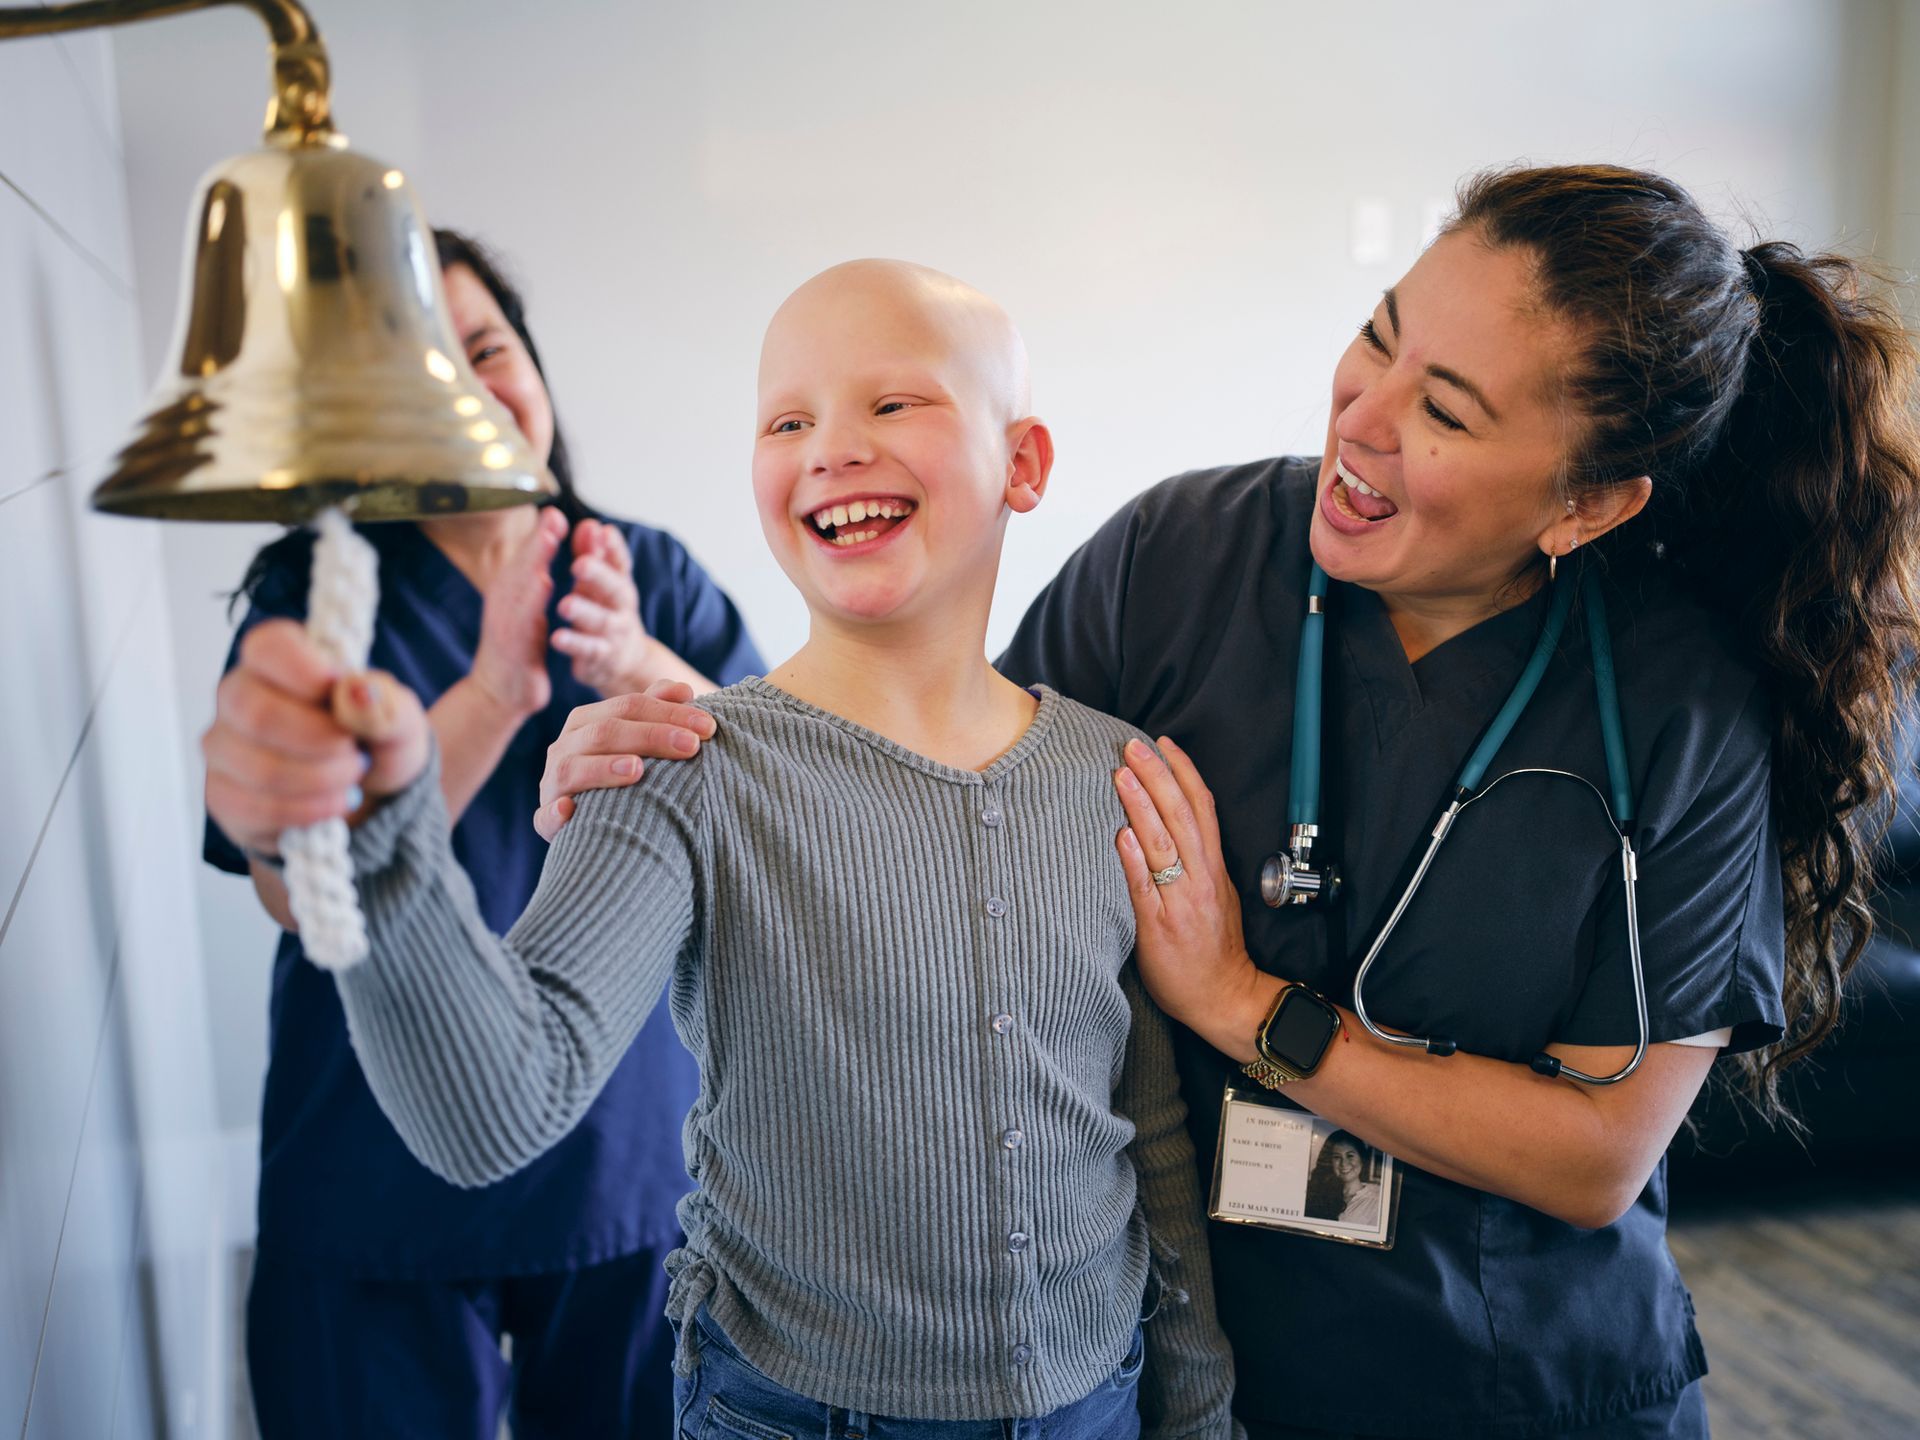 A child rings a bell as she celebrates the end of her chemotherapy treatment - Guyton, GA - Pendleton Financial Group